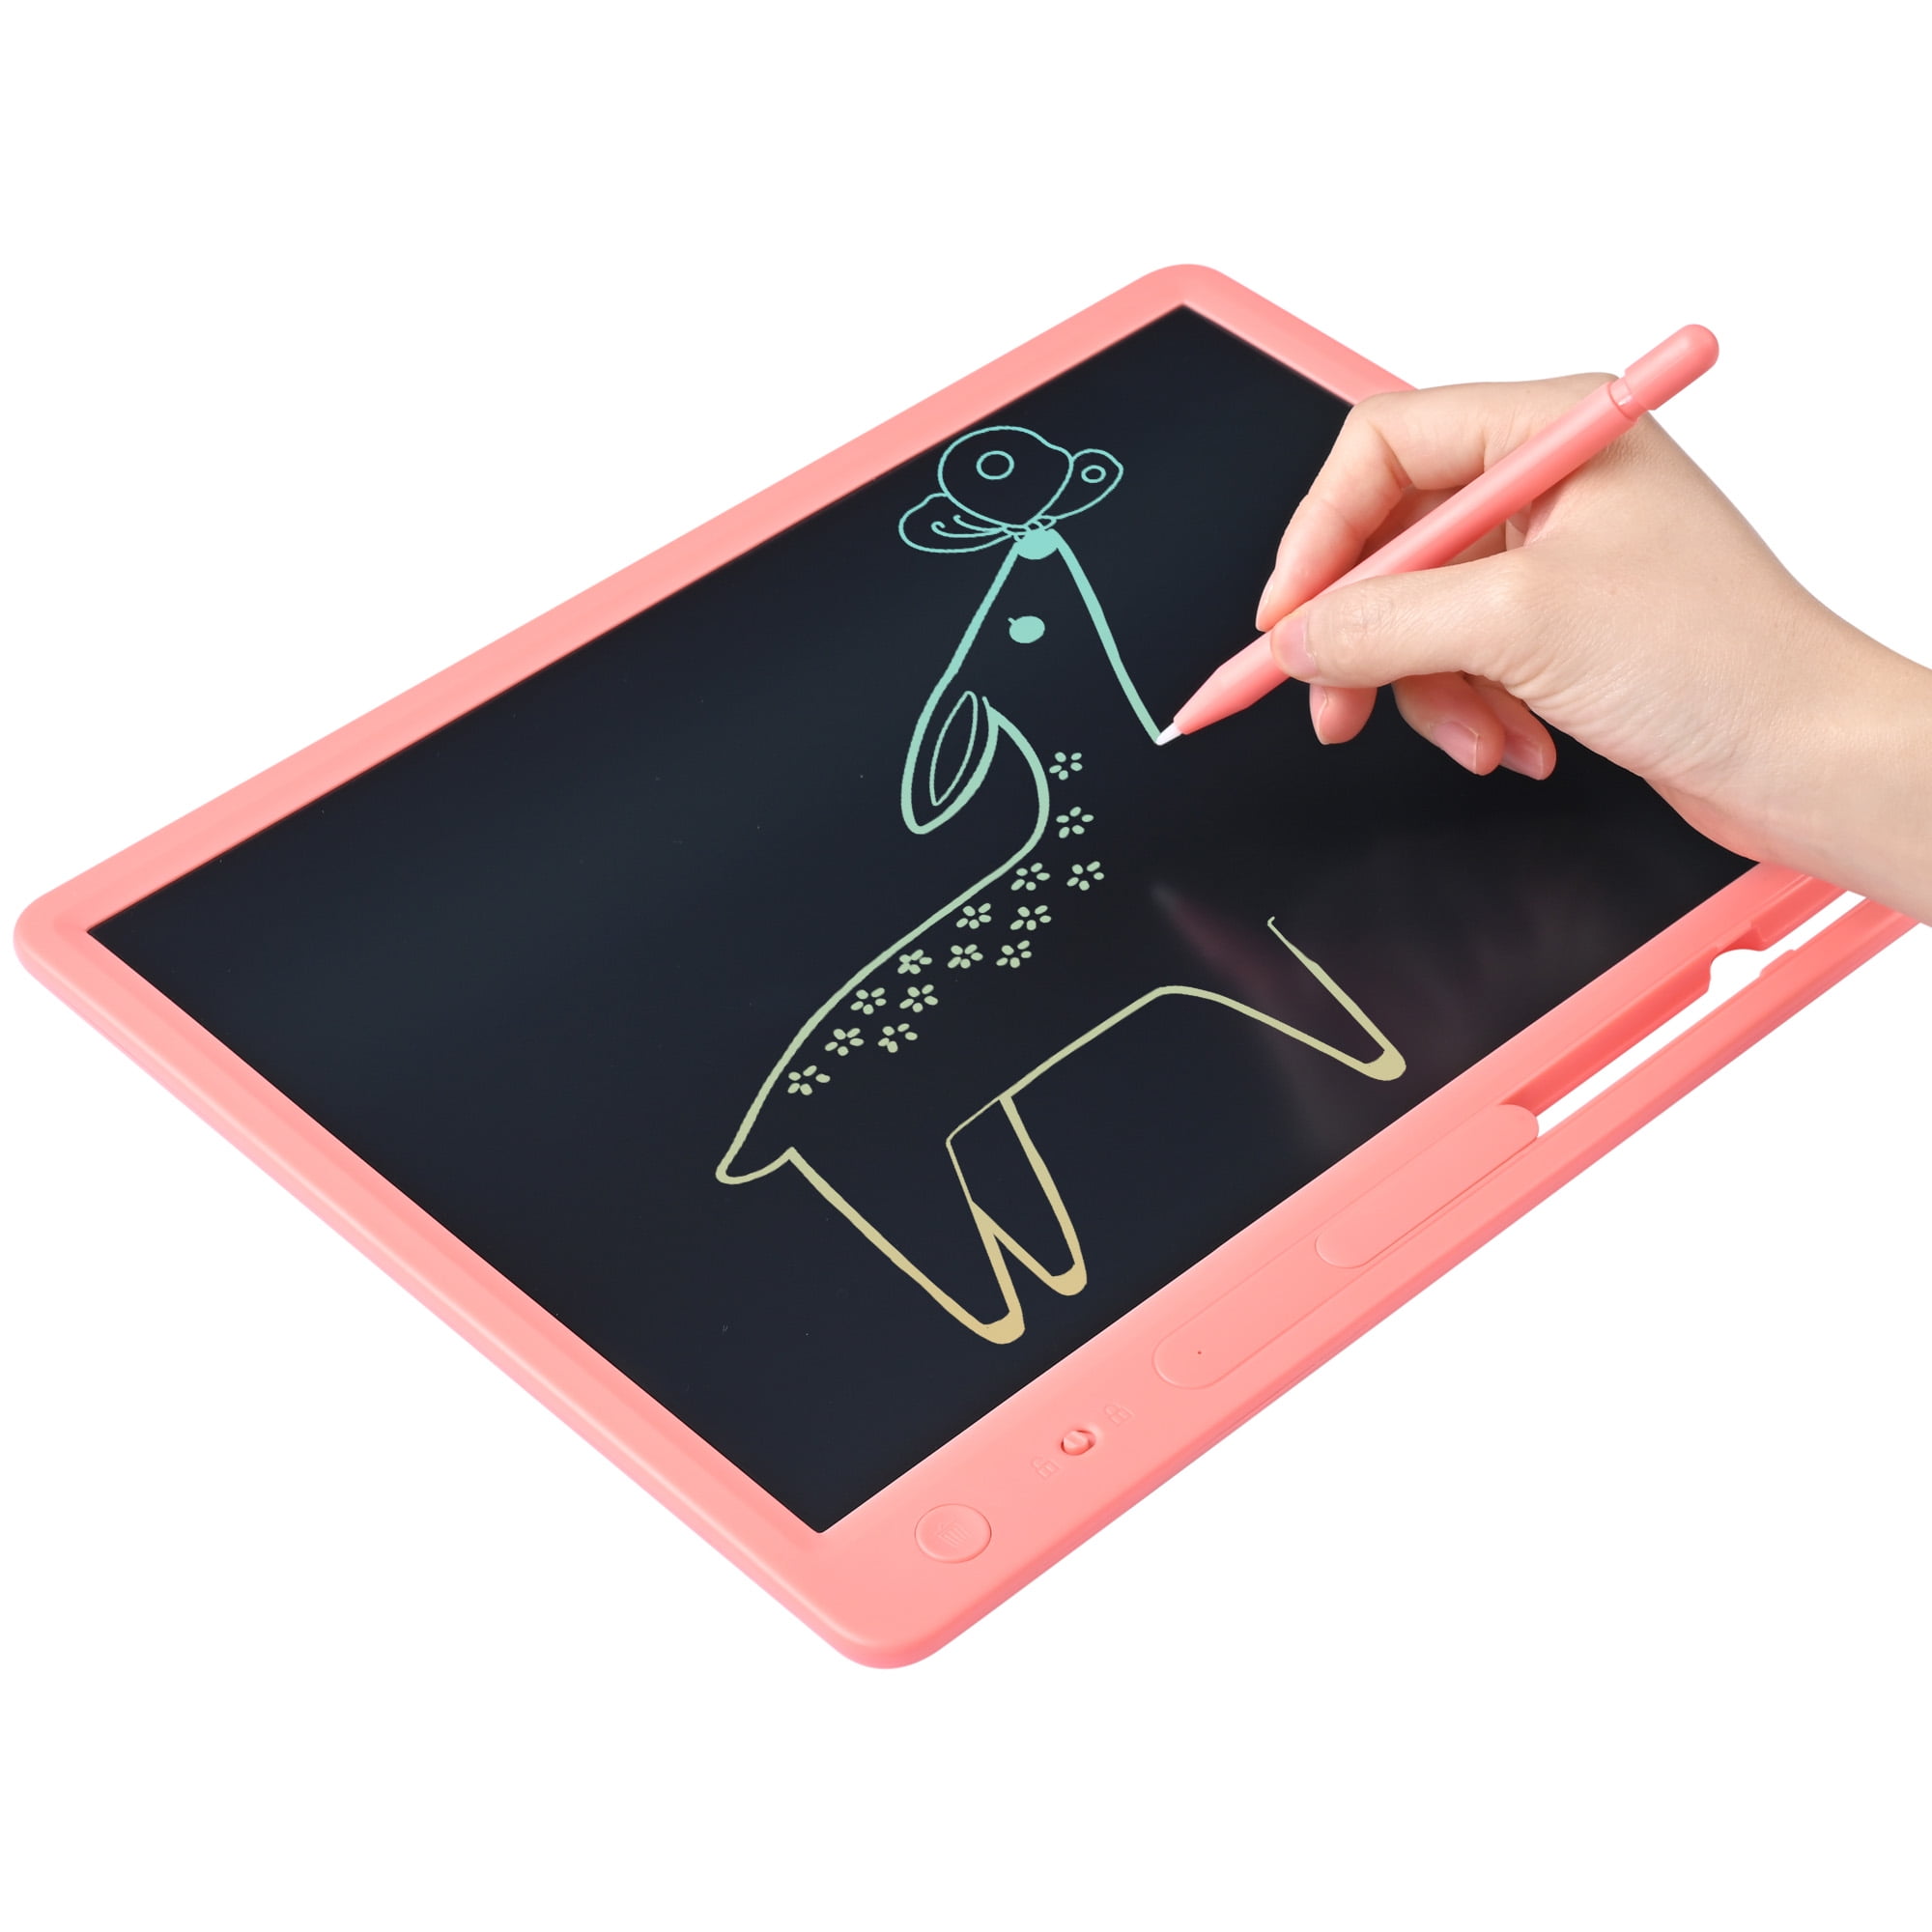 Afazfa 9 Color LCD Writing Pad Painting Drawing Tablet Message Doodle eWriter Board 